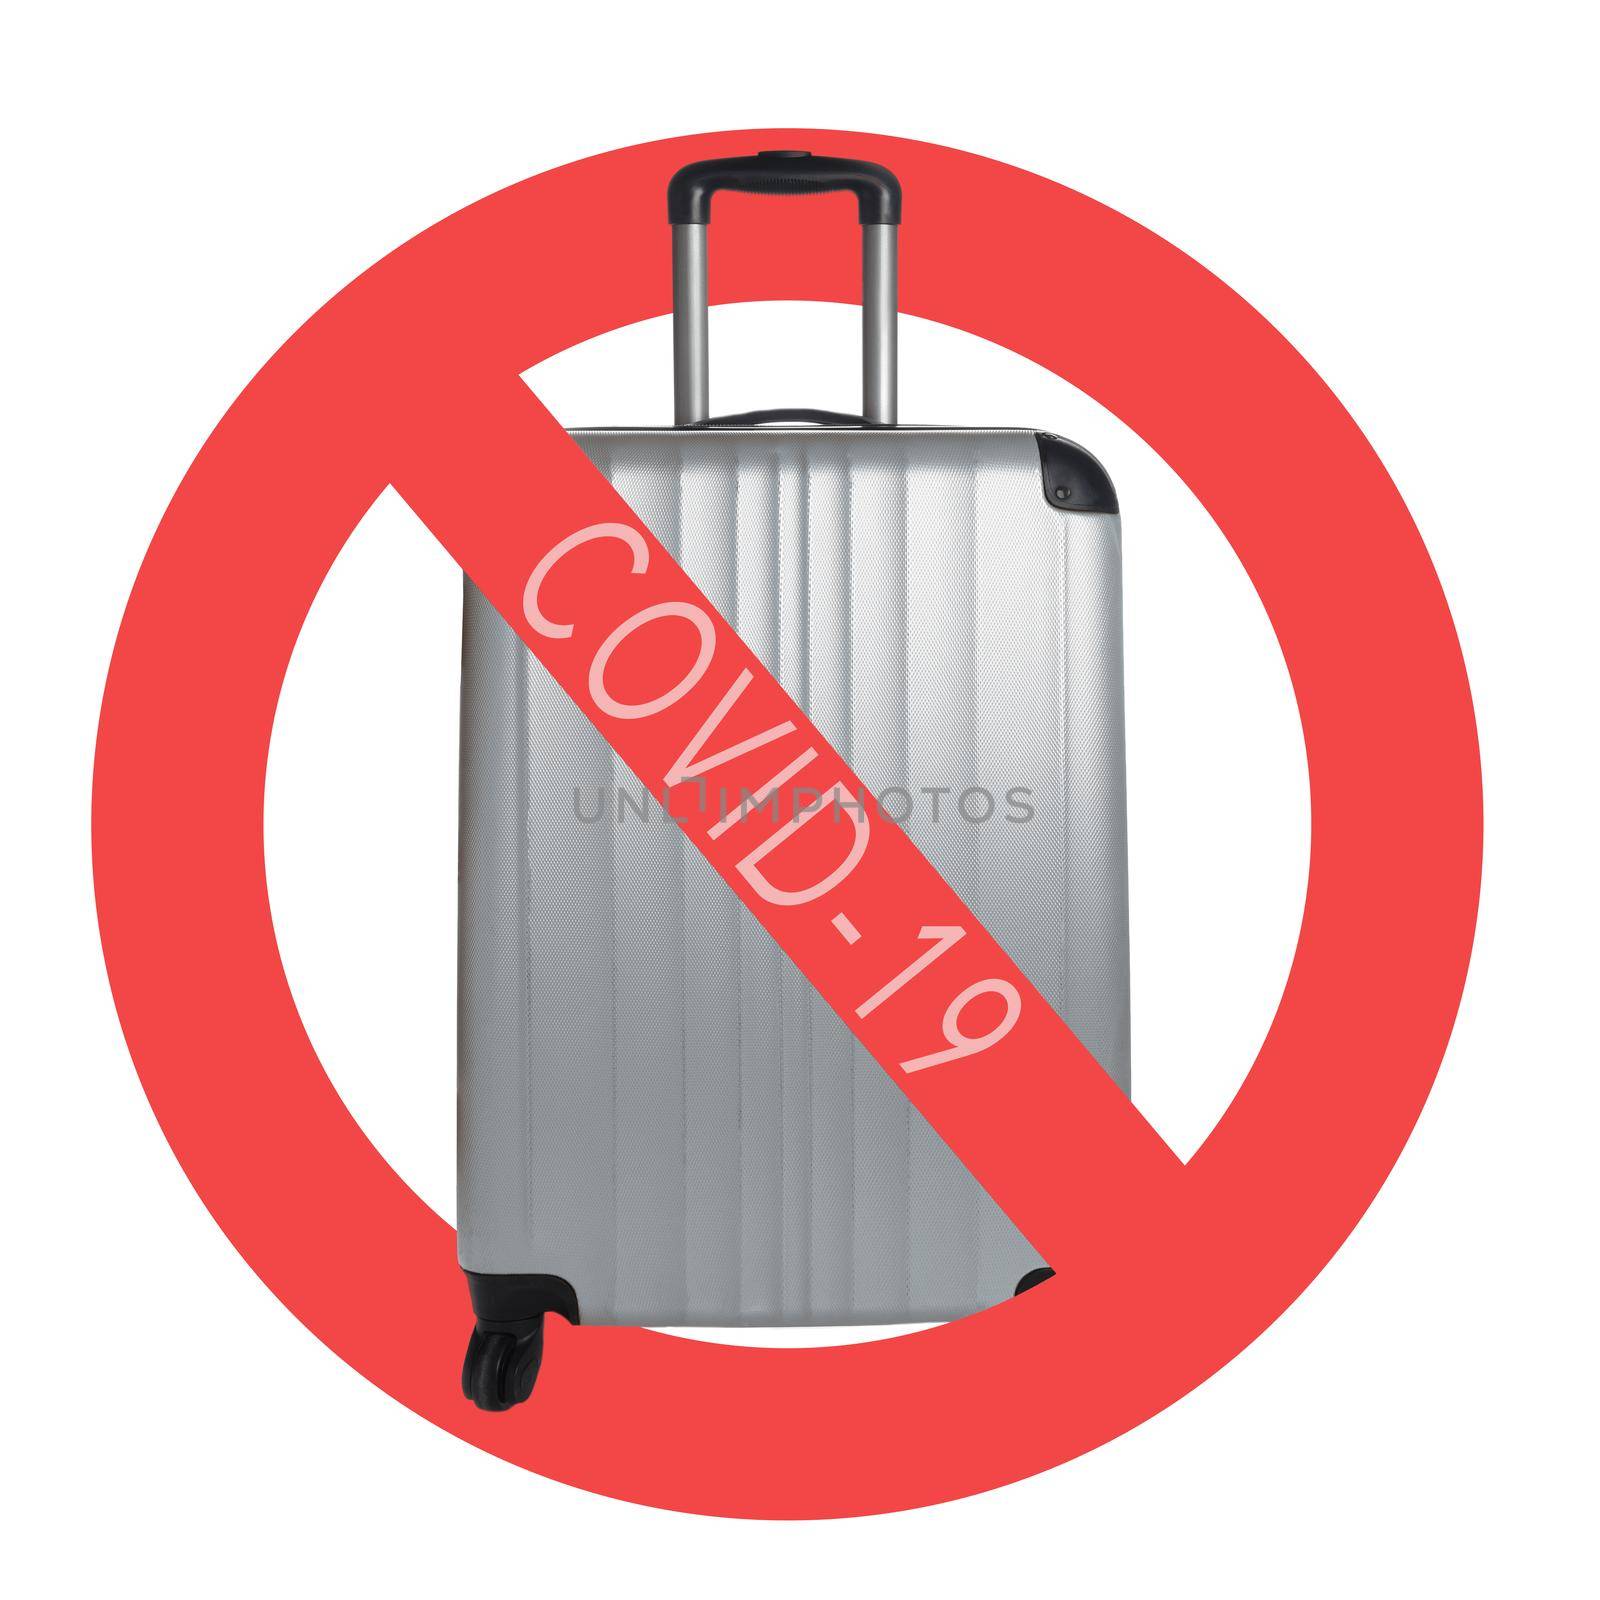 Silver Suitcase on a white background with international no symbol and COVID-19. Cancelled trip tourism restrictions concept during pandemic.